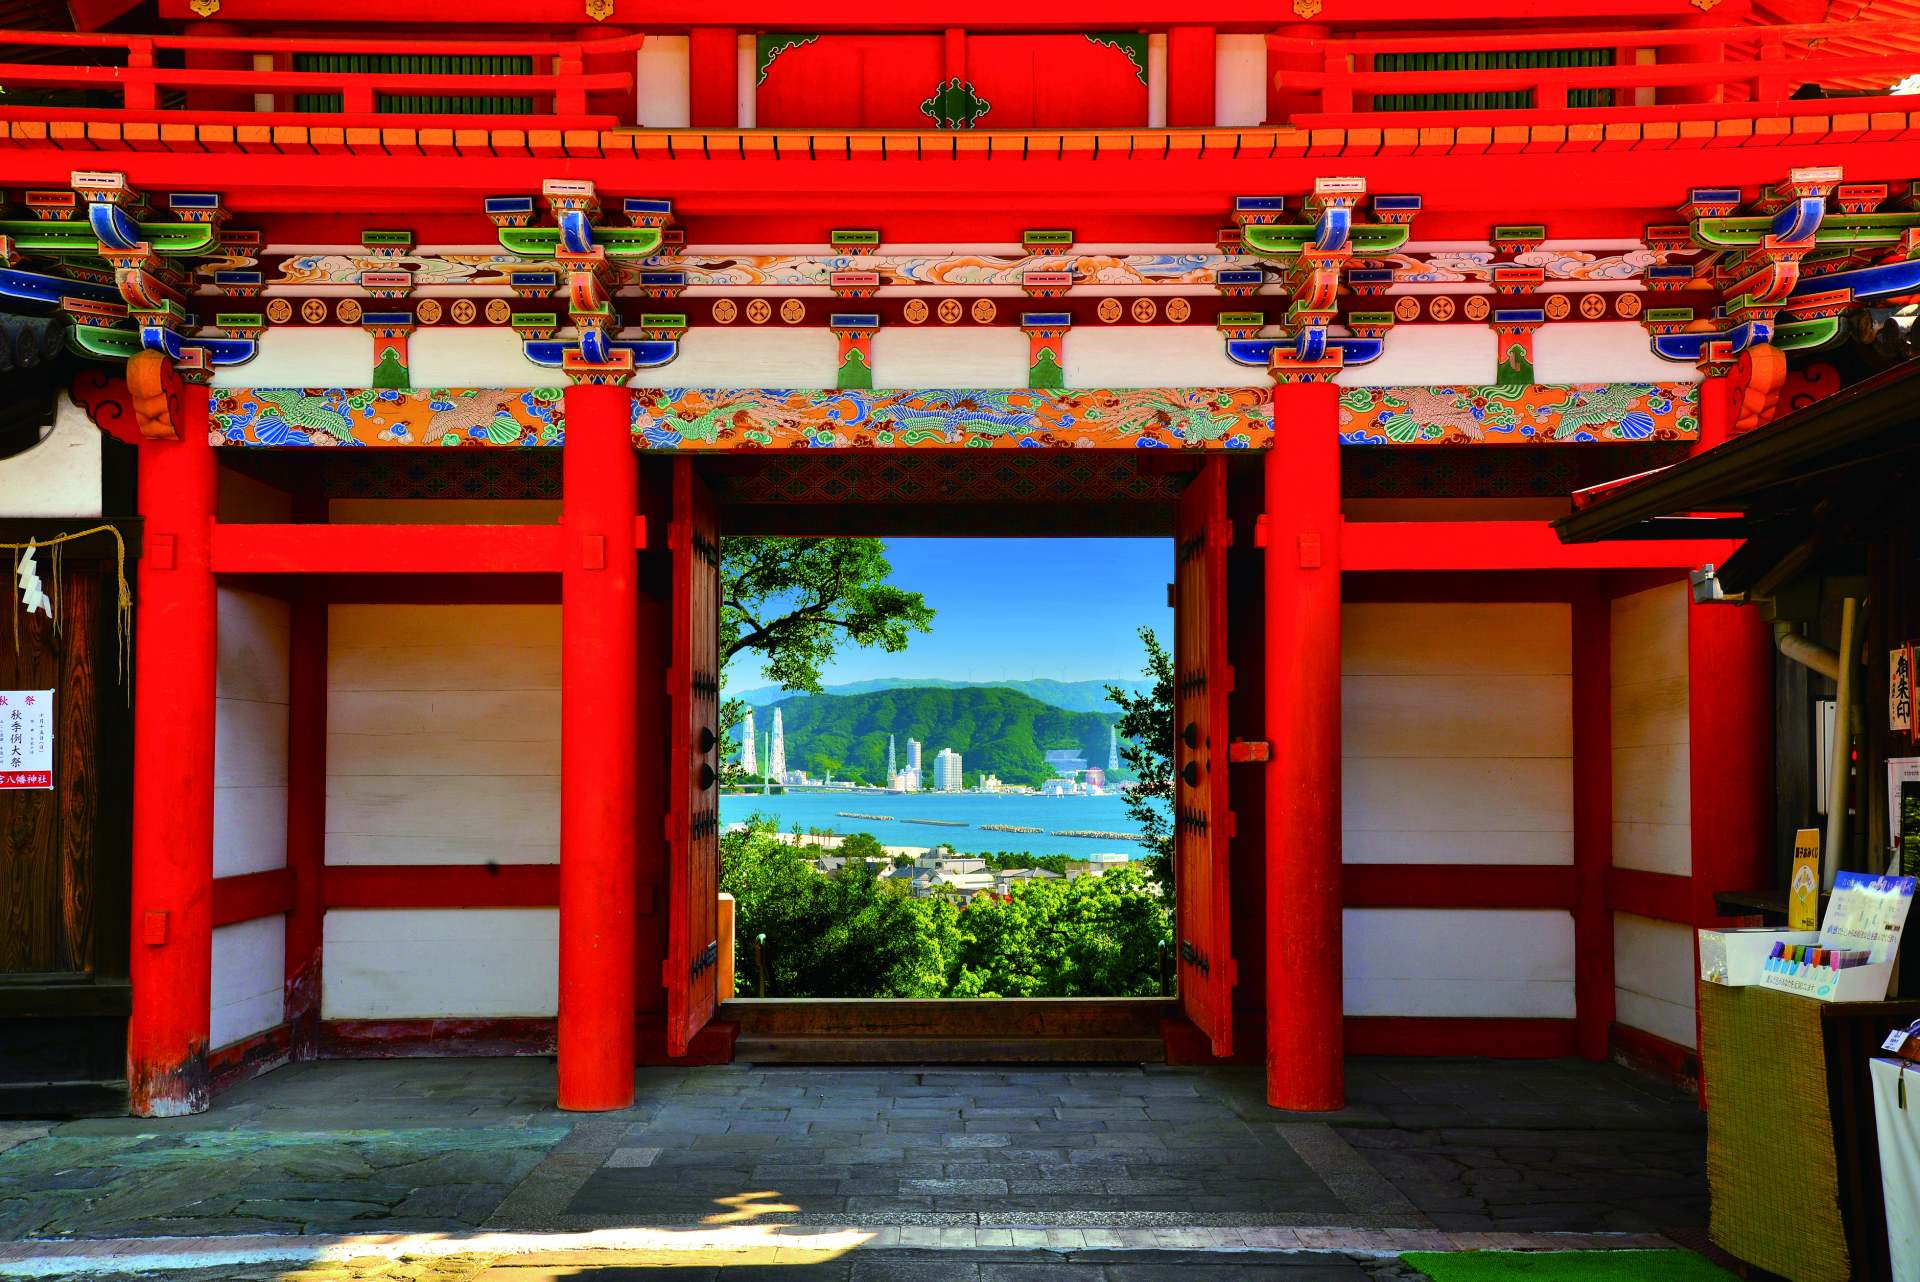 The side gate at Kishu-Toshogu   Shrine is said to be the Kansai region’s most vividly lacquered vermillion gate.